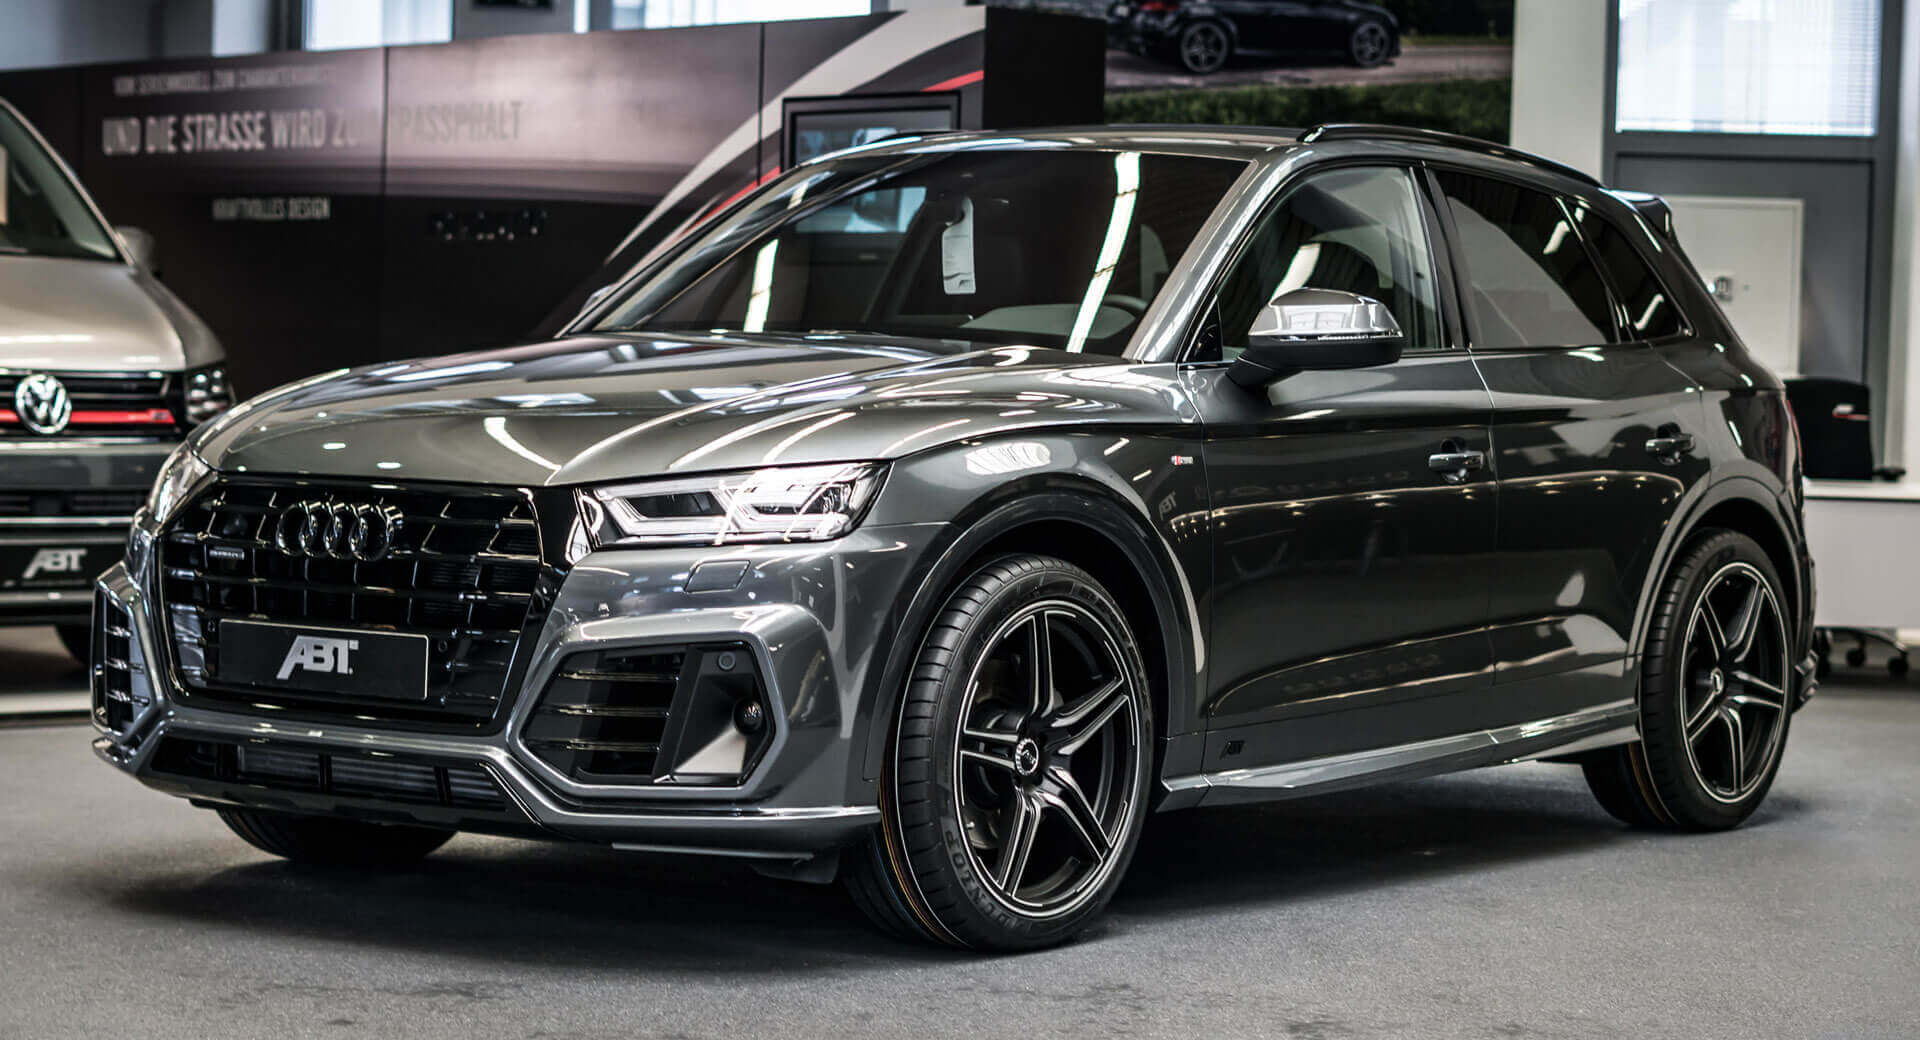 2018 Audi Q5 Gets New Clothes And A Power Boost From ABT